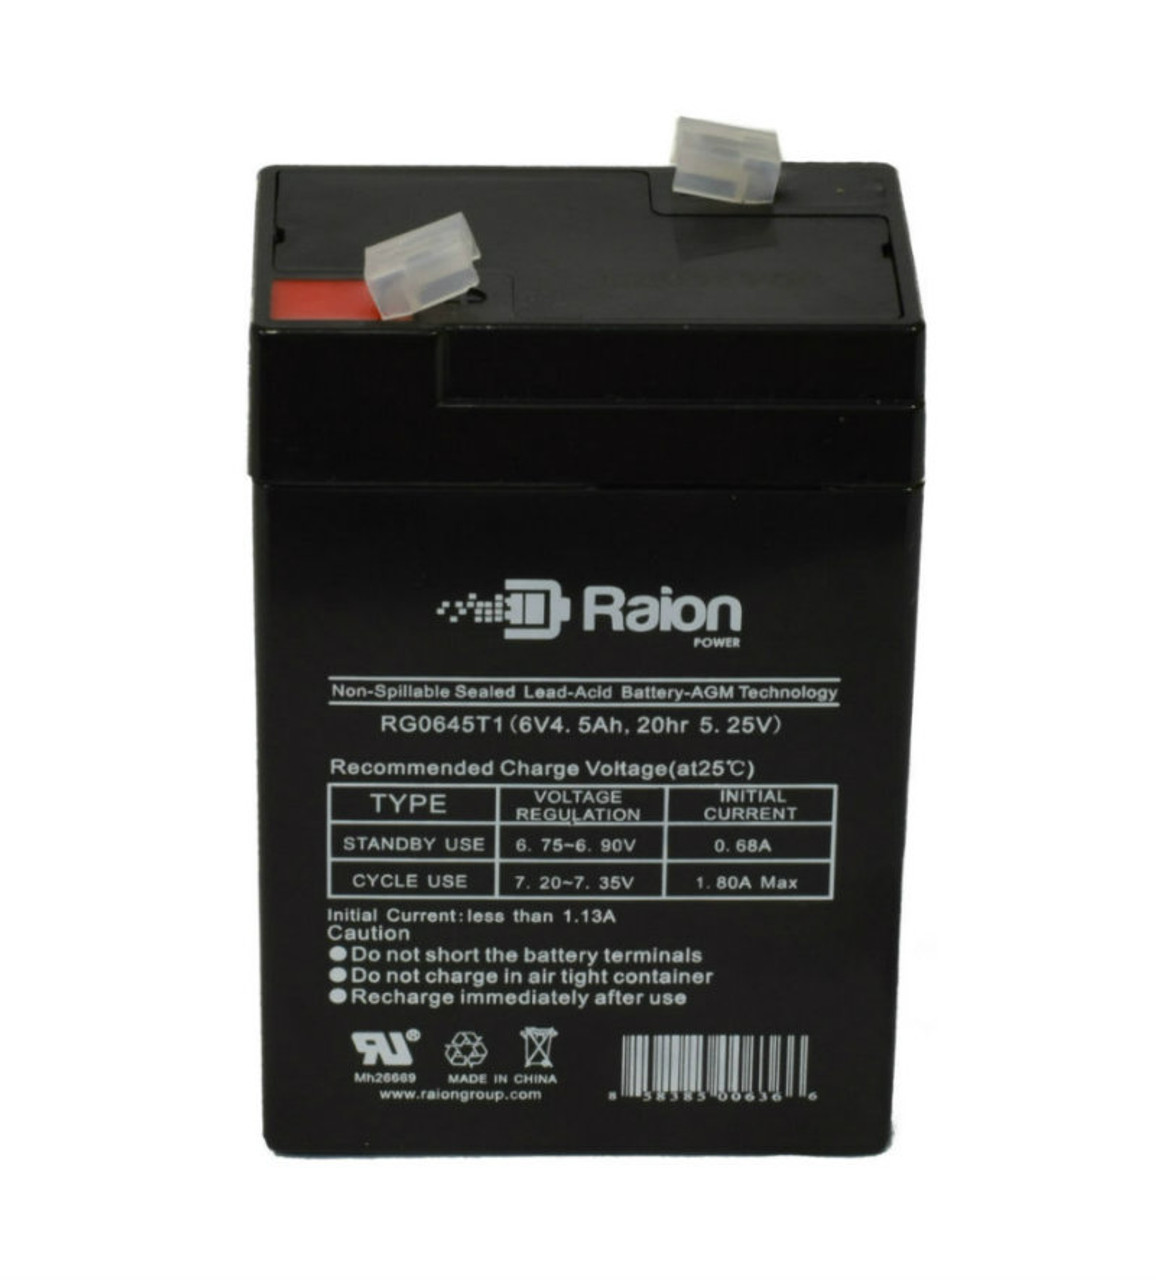 Raion Power RG0645T1 Replacement Battery Cartridge for Peg Perego IGED1116 6V CHOO CHOO Express Train